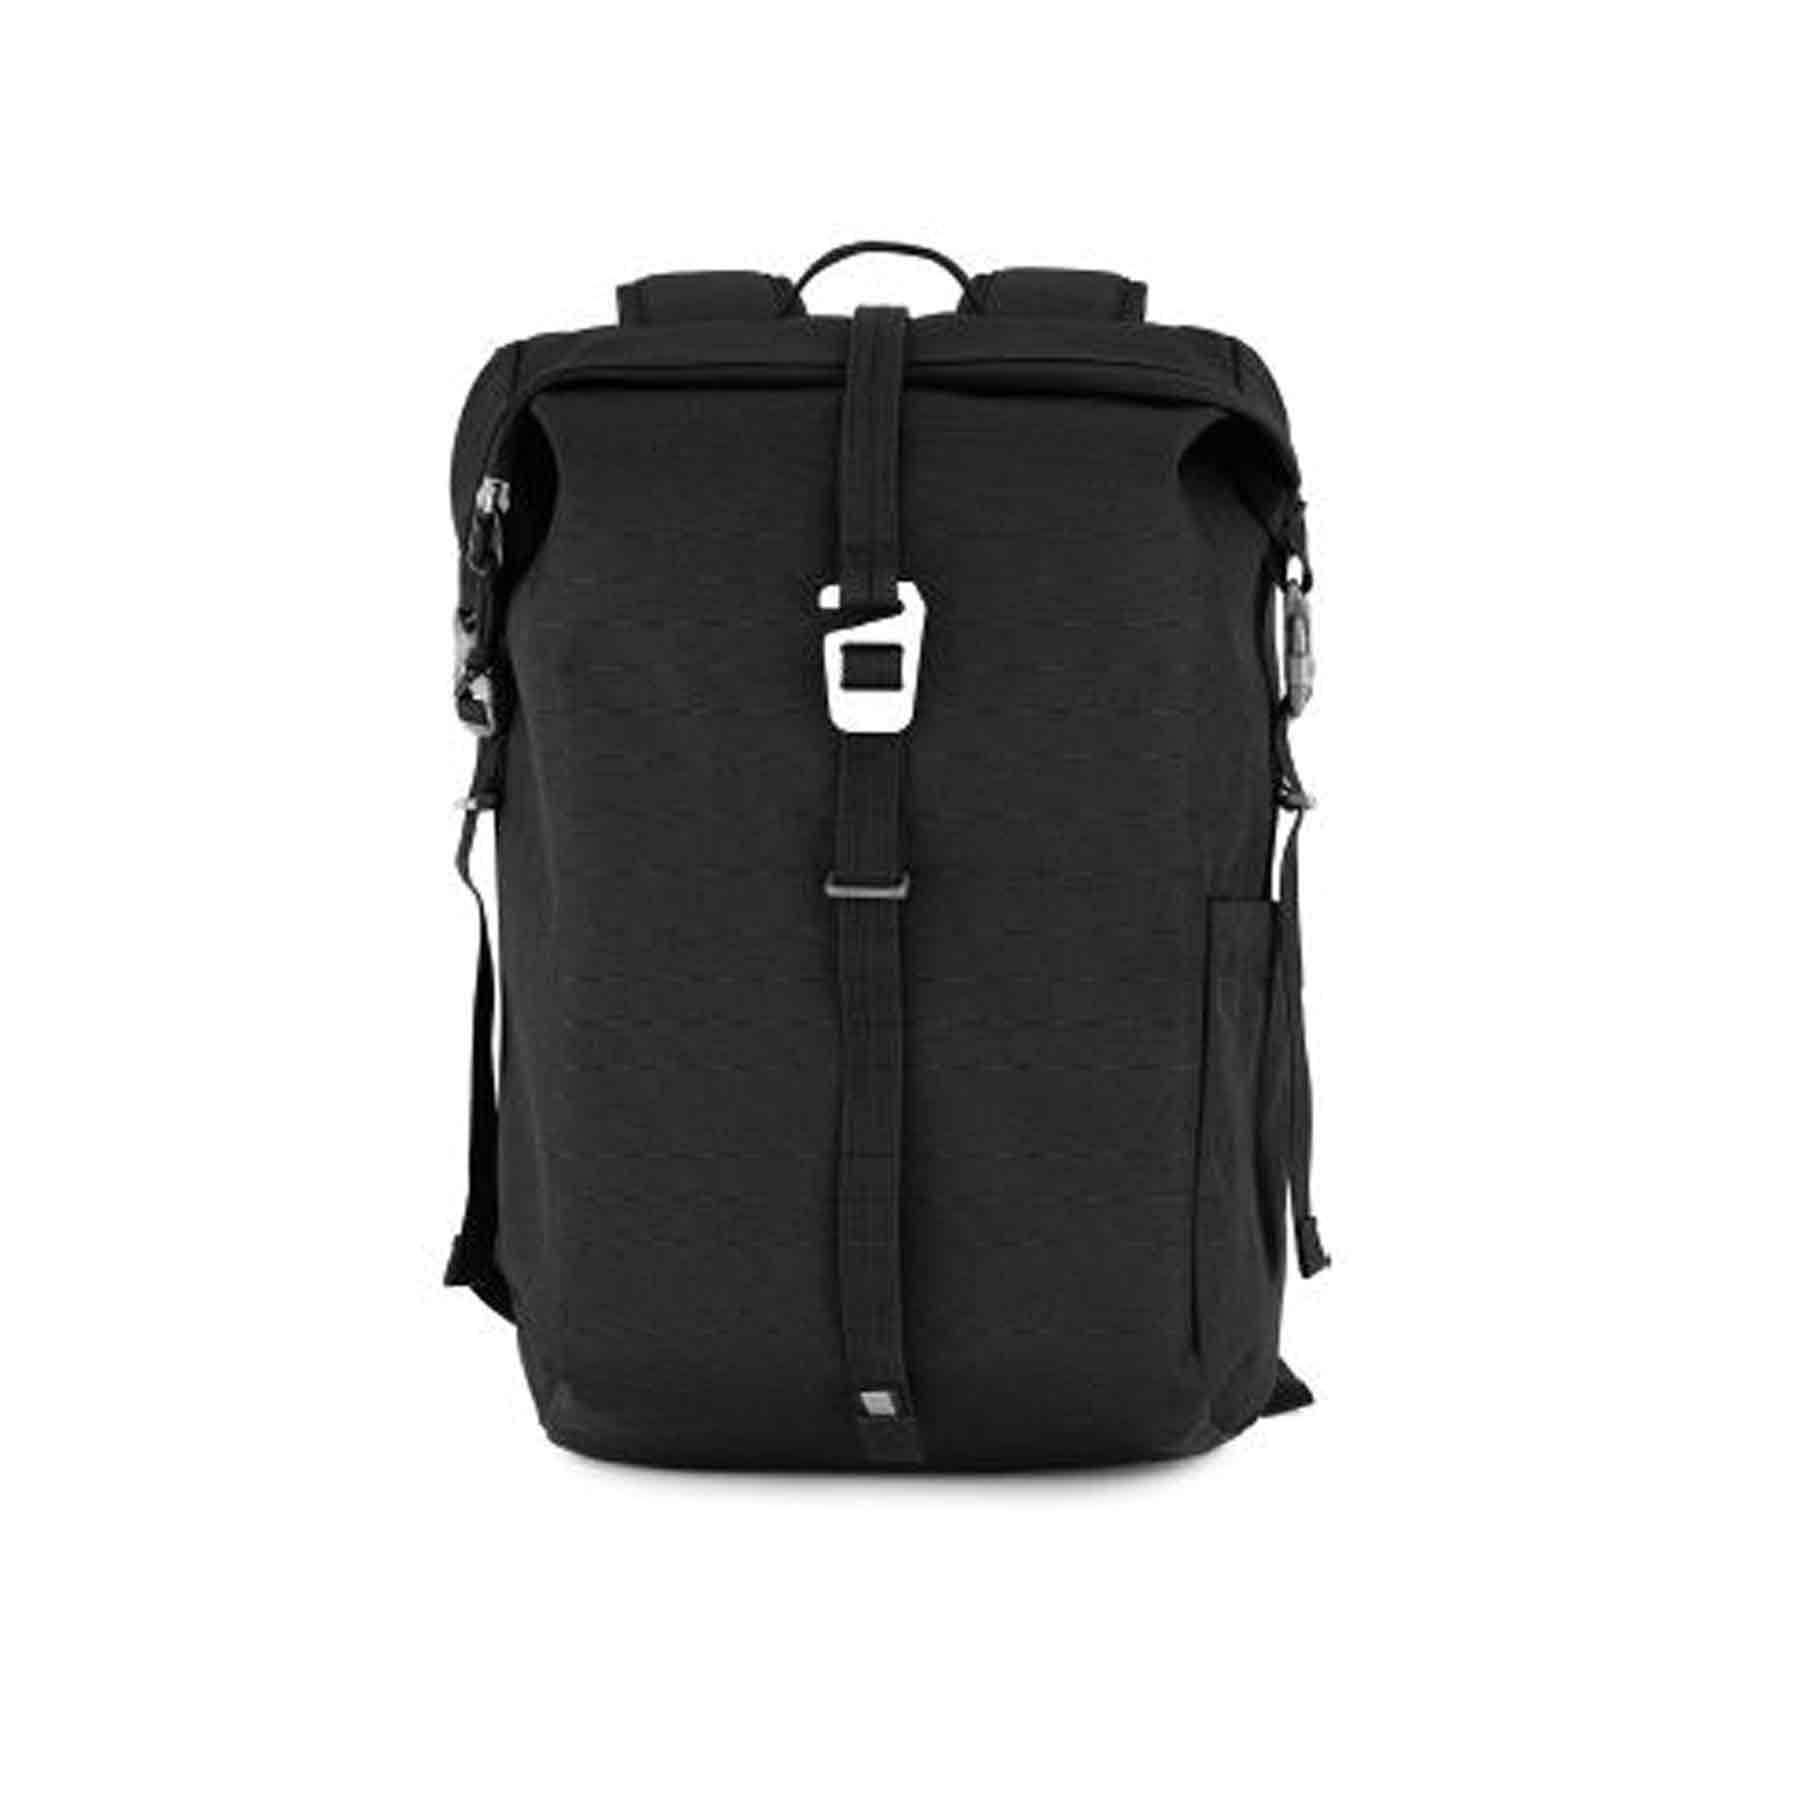 16L Kiwi Classic Rolltop by Craghoppers - The Luxury Promotional Gifts Company Limited